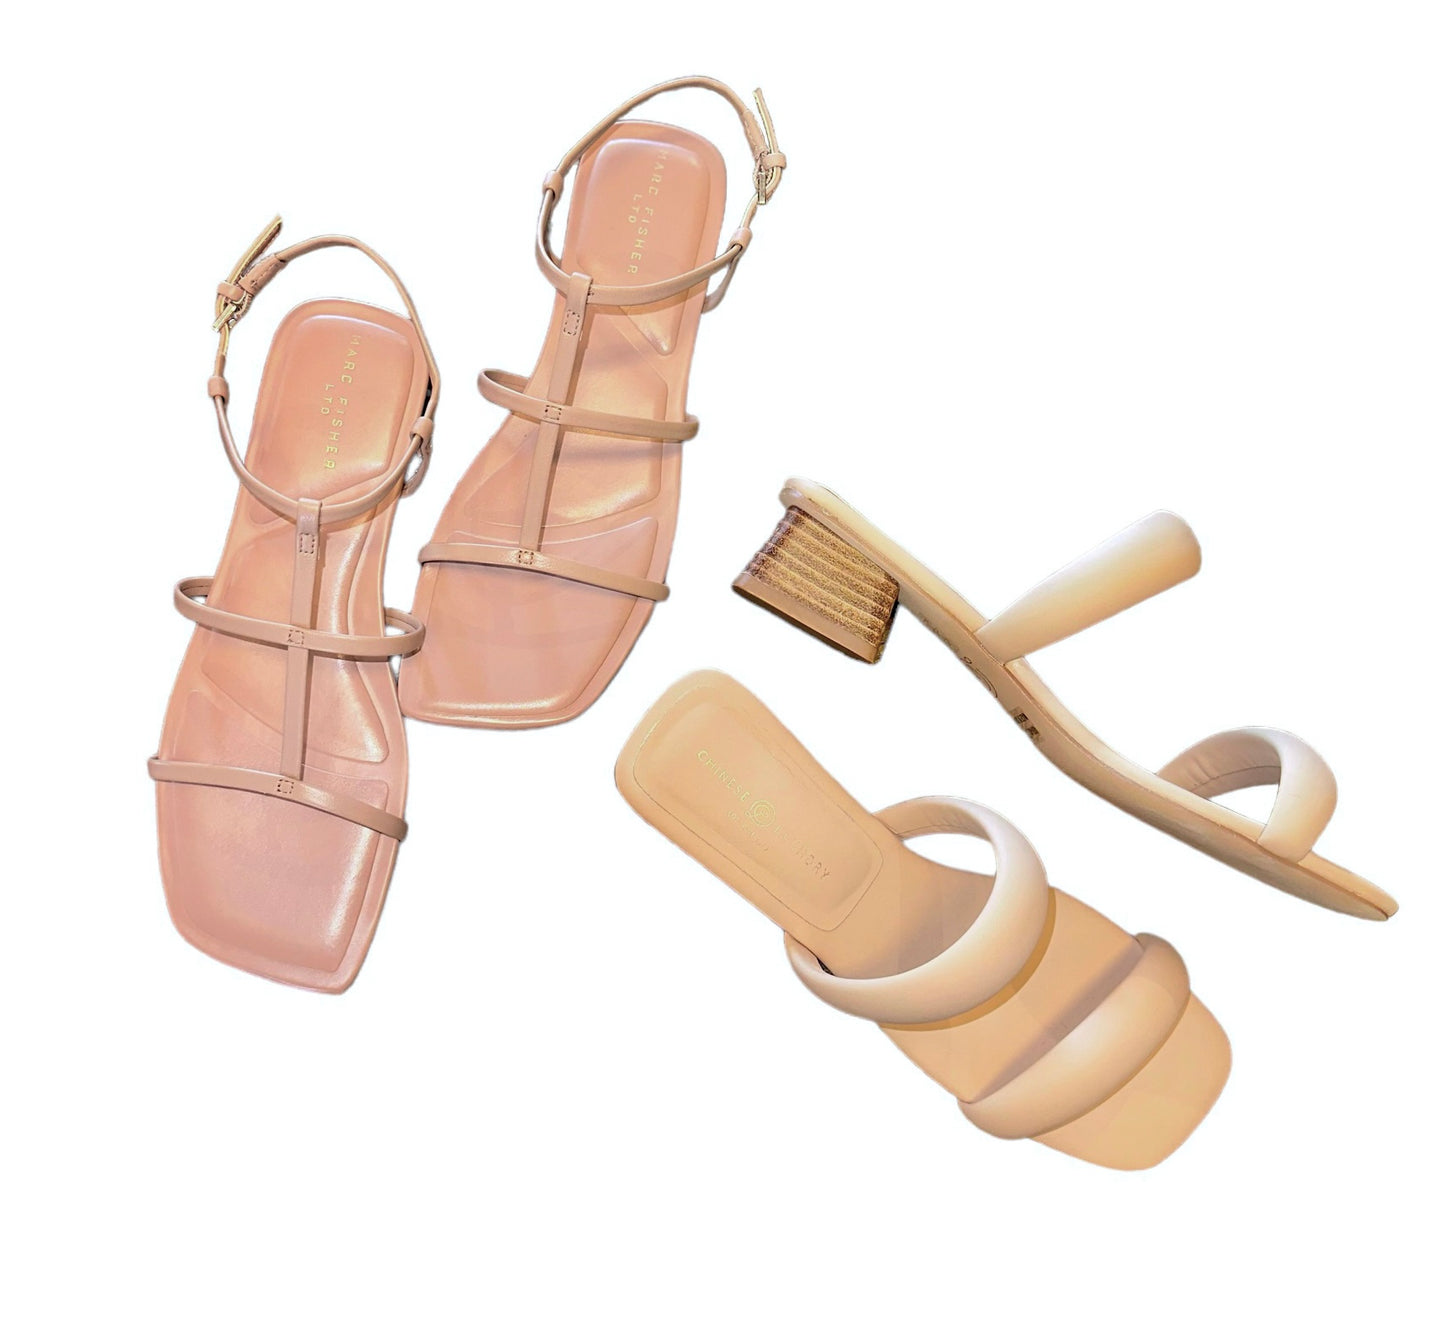 Marris Sandal in medium natural by Marc Fisher